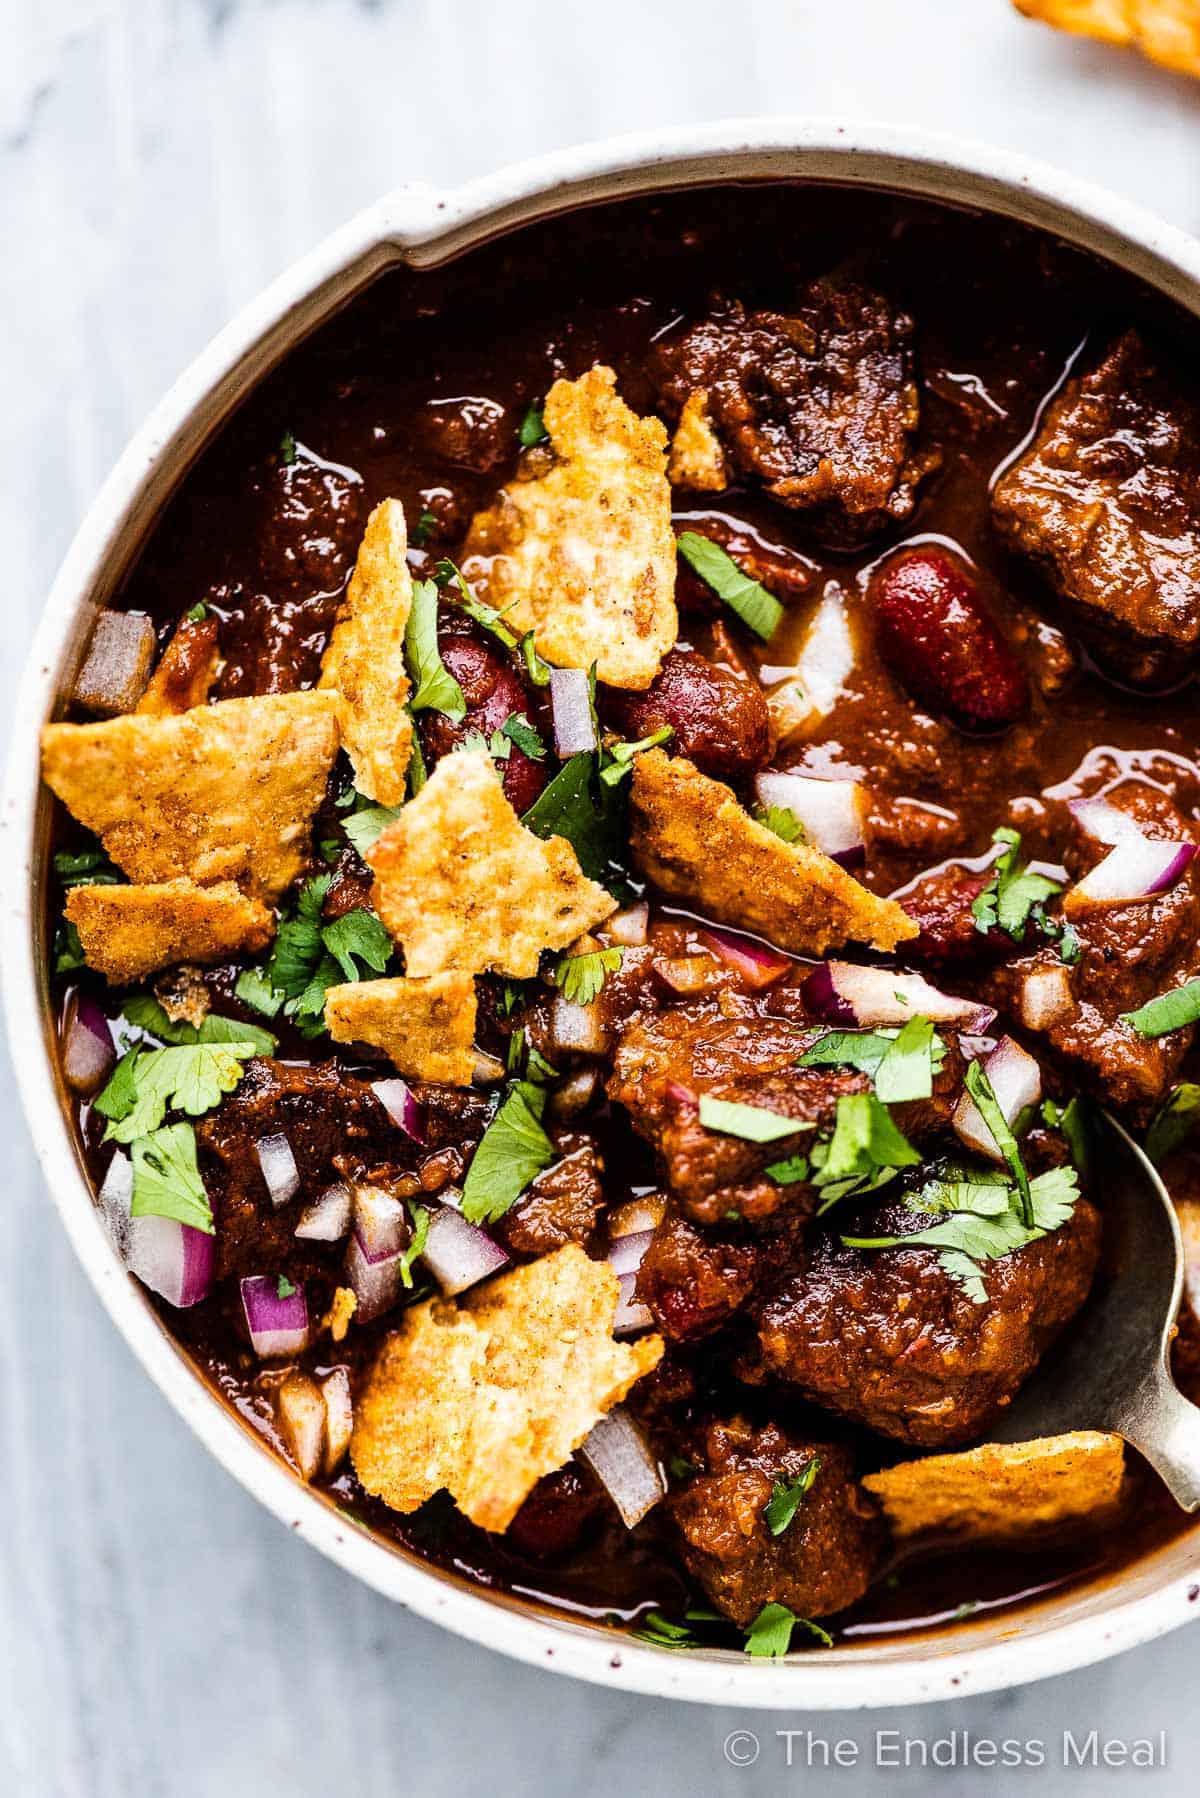 A hearty bowl of beef chili made with tender chuck steak, served with crispy tortilla chips.